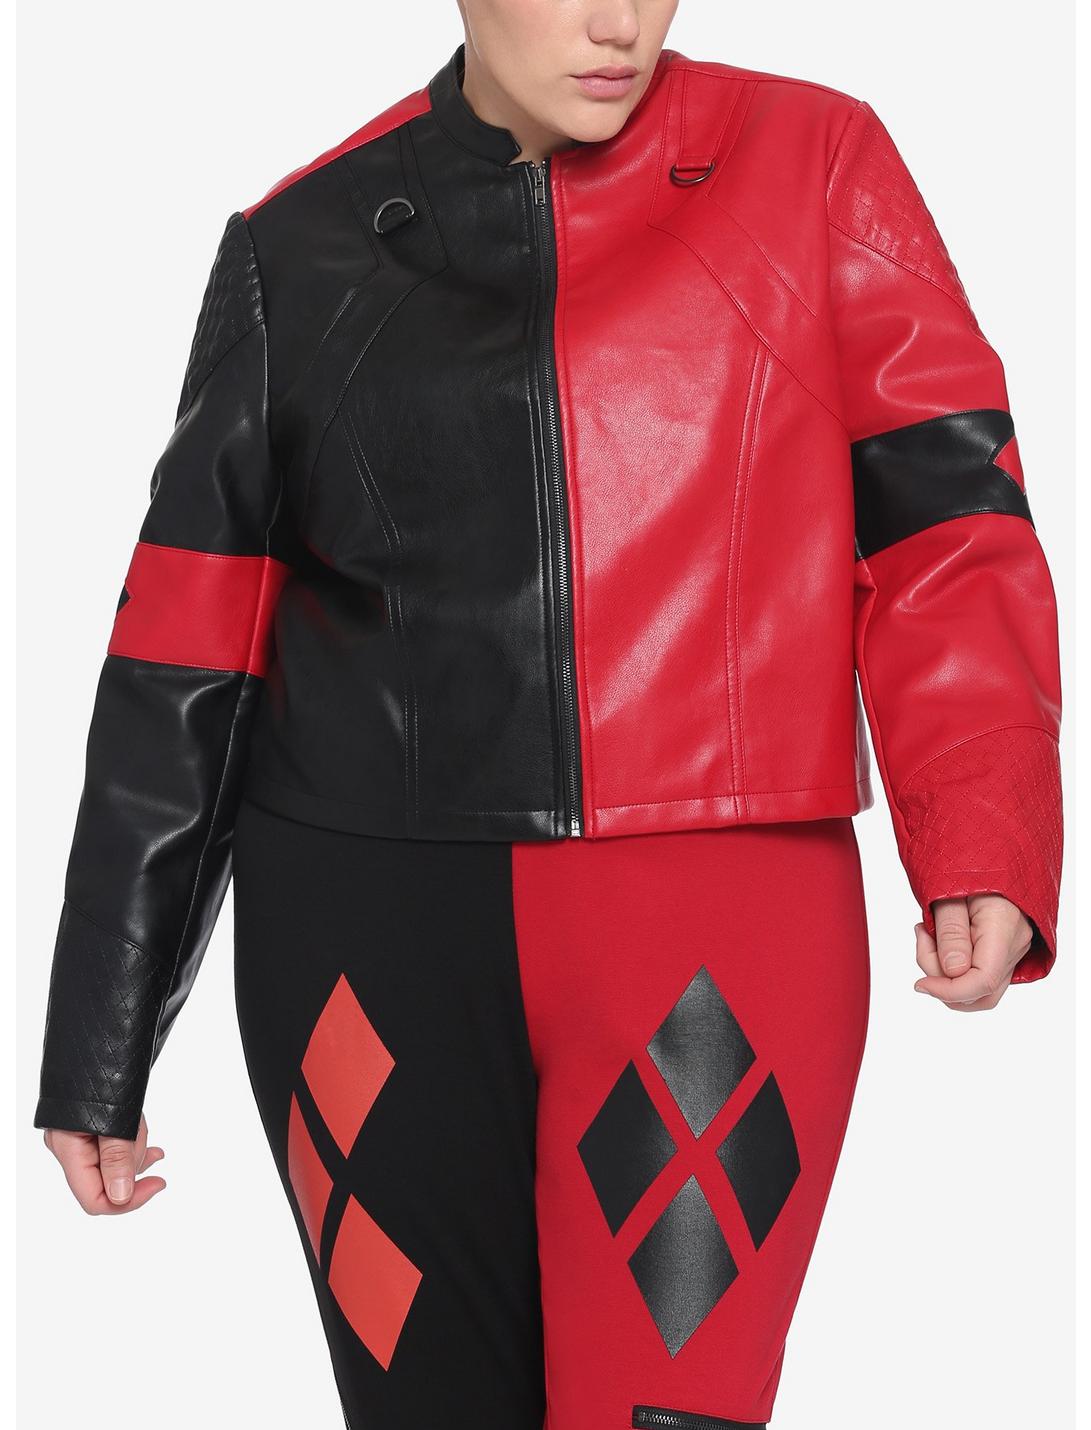 DC Comics The Suicide Squad Harley Quinn Live Fast Die Clown Girls Jacket Plus Size, RED, hi-res